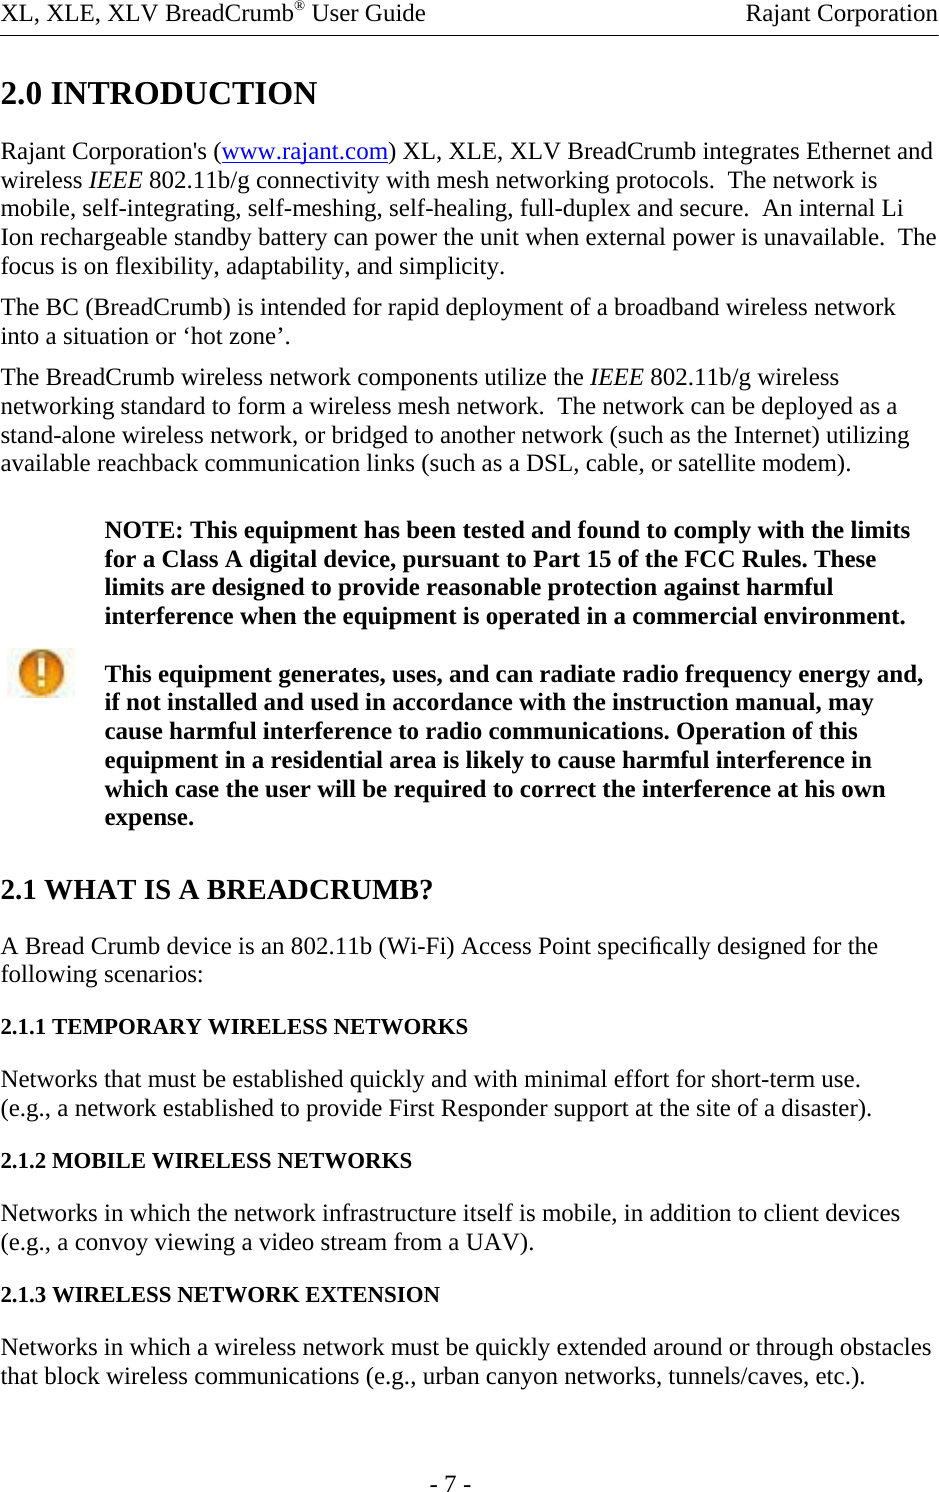 XL, XLE, XLV BreadCrumb® User Guide    Rajant Corporation 2.0 INTRODUCTION Rajant Corporation&apos;s (www.rajant.com) XL, XLE, XLV BreadCrumb integrates Ethernet and wireless IEEE 802.11b/g connectivity with mesh networking protocols.  The network is mobile, self-integrating, self-meshing, self-healing, full-duplex and secure.  An internal Li Ion rechargeable standby battery can power the unit when external power is unavailable.  The focus is on flexibility, adaptability, and simplicity. The BC (BreadCrumb) is intended for rapid deployment of a broadband wireless network into a situation or ‘hot zone’. The BreadCrumb wireless network components utilize the IEEE 802.11b/g wireless networking standard to form a wireless mesh network.  The network can be deployed as a stand-alone wireless network, or bridged to another network (such as the Internet) utilizing available reachback communication links (such as a DSL, cable, or satellite modem). NOTE: This equipment has been tested and found to comply with the limits for a Class A digital device, pursuant to Part 15 of the FCC Rules. These limits are designed to provide reasonable protection against harmful interference when the equipment is operated in a commercial environment.  This equipment generates, uses, and can radiate radio frequency energy and, if not installed and used in accordance with the instruction manual, may cause harmful interference to radio communications. Operation of this equipment in a residential area is likely to cause harmful interference in which case the user will be required to correct the interference at his own expense.   2.1 WHAT IS A BREADCRUMB?  A Bread Crumb device is an 802.11b (Wi-Fi) Access Point speciﬁcally designed for the following scenarios:  2.1.1 TEMPORARY WIRELESS NETWORKS  Networks that must be established quickly and with minimal effort for short-term use.  (e.g., a network established to provide First Responder support at the site of a disaster). 2.1.2 MOBILE WIRELESS NETWORKS  Networks in which the network infrastructure itself is mobile, in addition to client devices (e.g., a convoy viewing a video stream from a UAV). 2.1.3 WIRELESS NETWORK EXTENSION  Networks in which a wireless network must be quickly extended around or through obstacles that block wireless communications (e.g., urban canyon networks, tunnels/caves, etc.).       - 7 - 